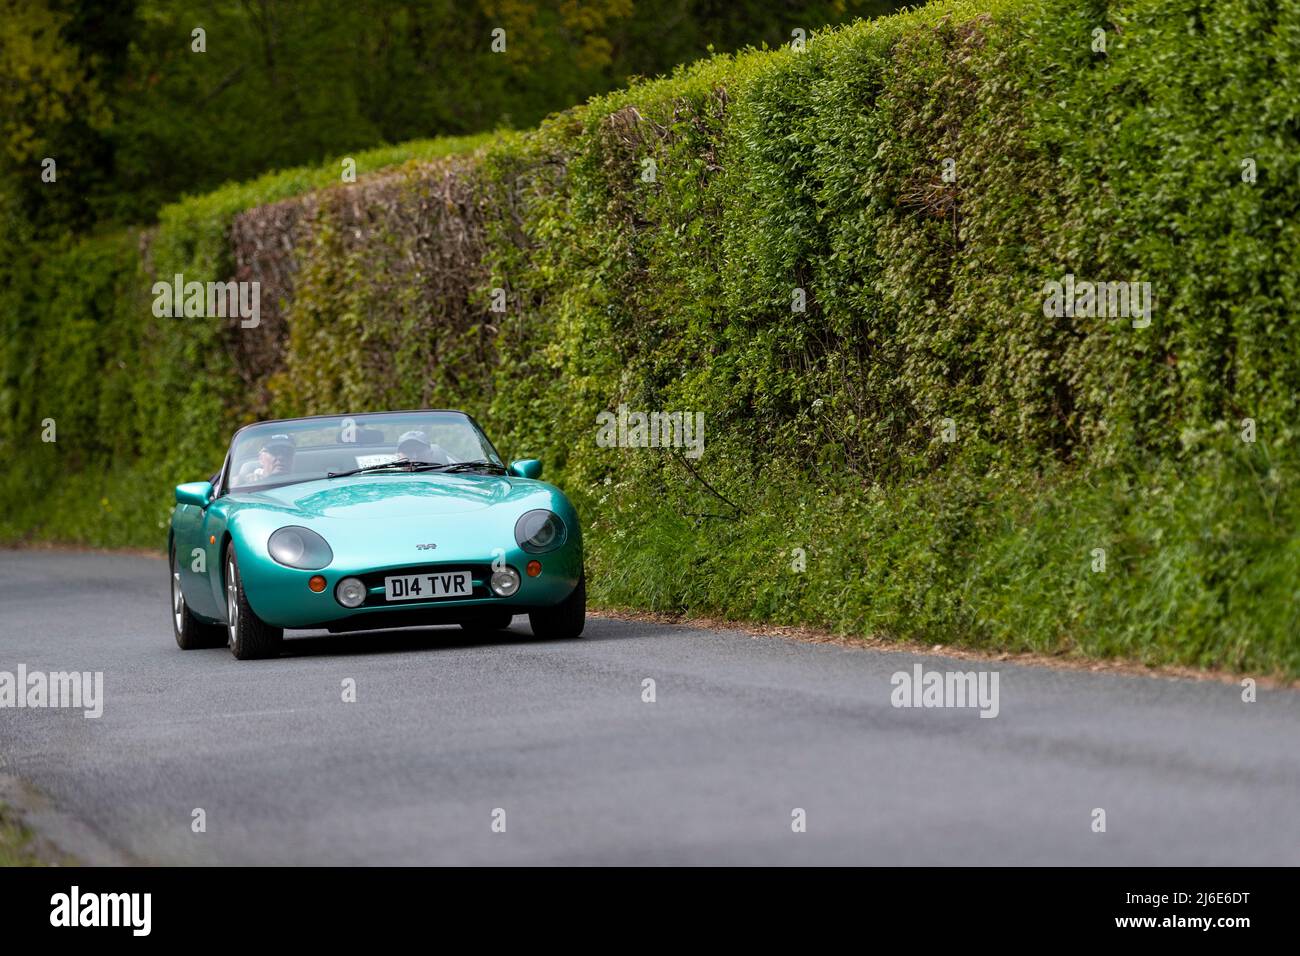 TVR Cerbera taking part in the classic cars springtime Rotary Club charity 'Wye Run' through Wales and the Wye Valley. Stock Photo